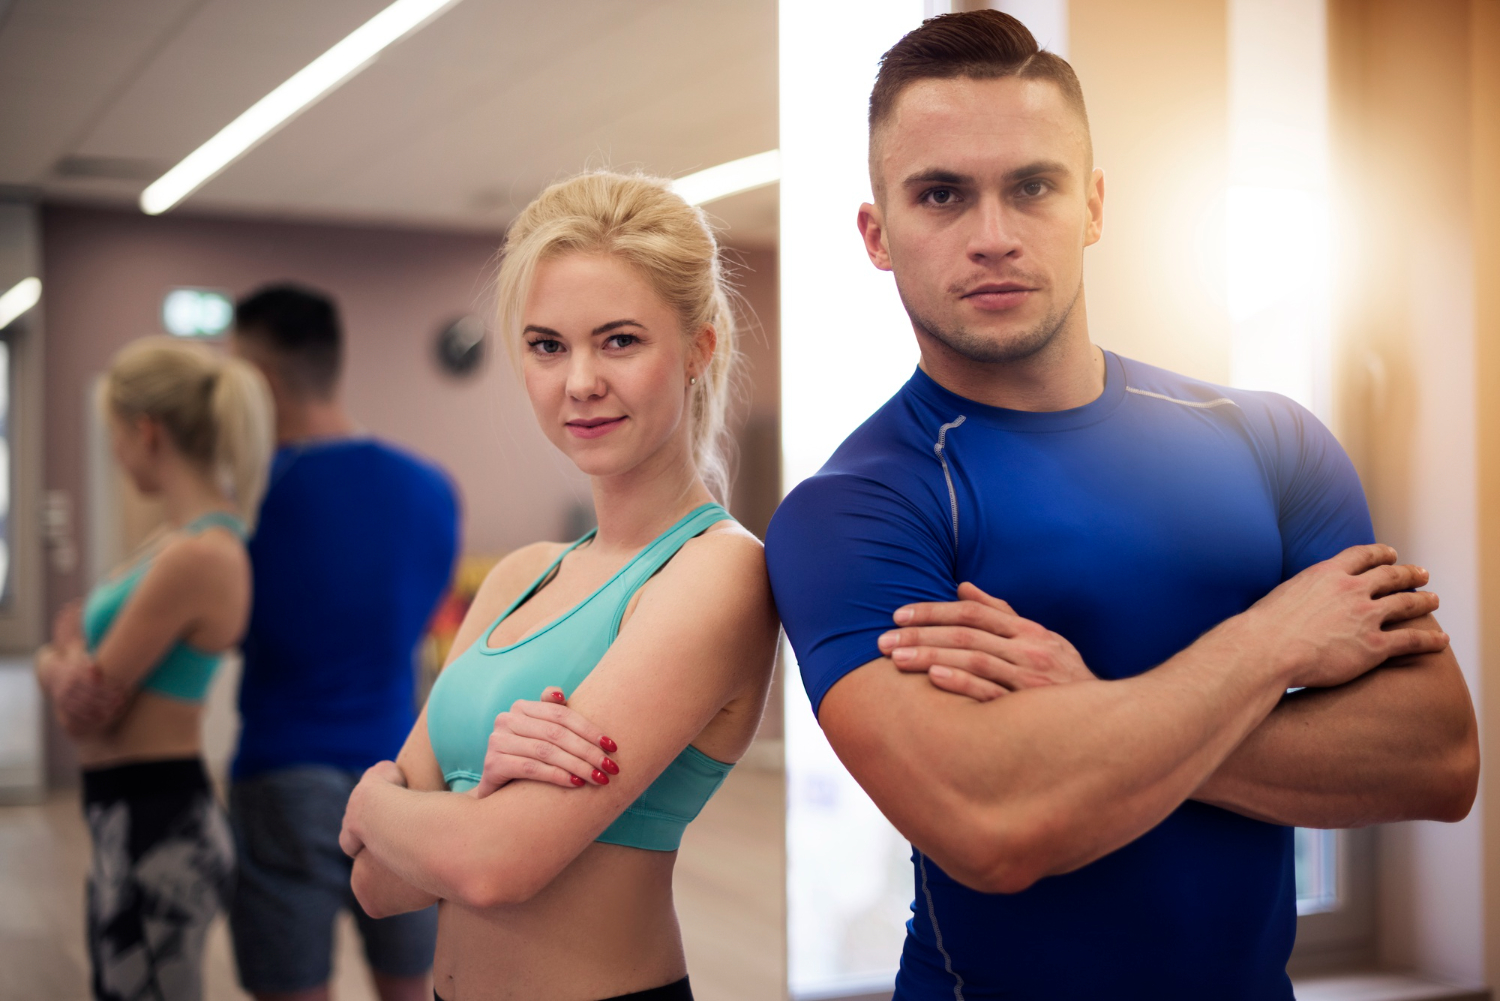 Career in Fitness and Exercise Industry